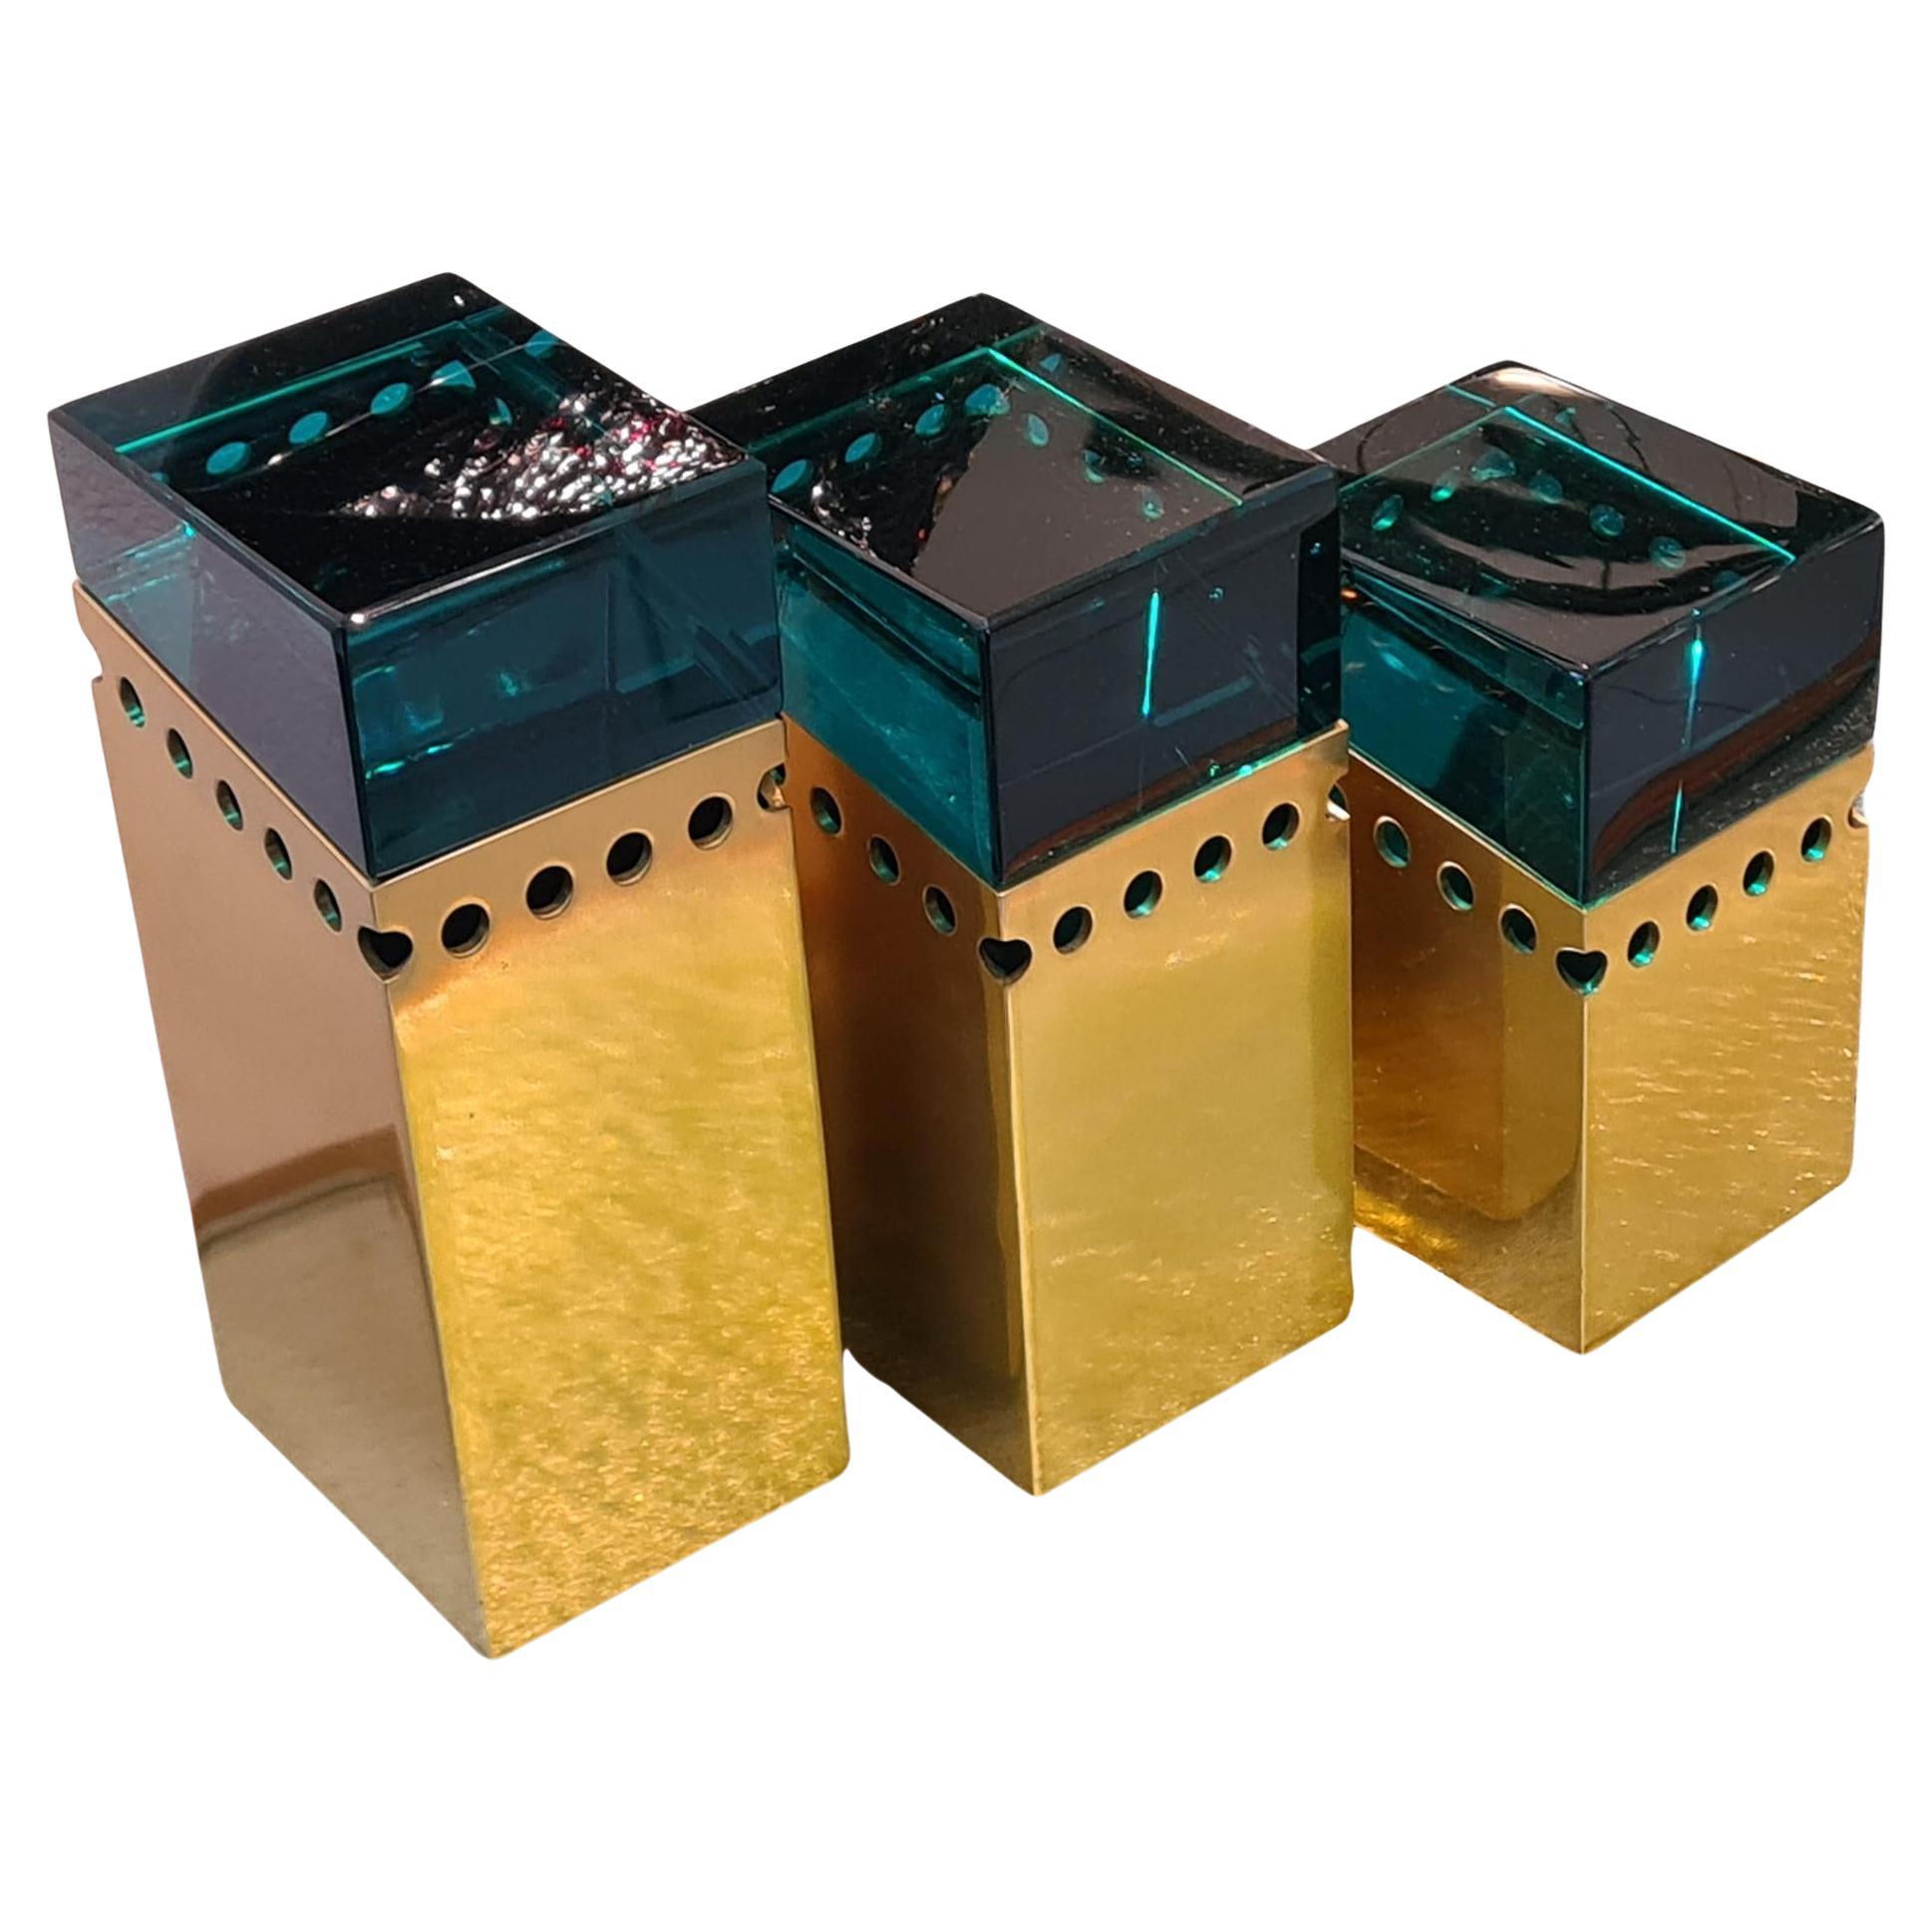 tRAPHOR boxes For Sale